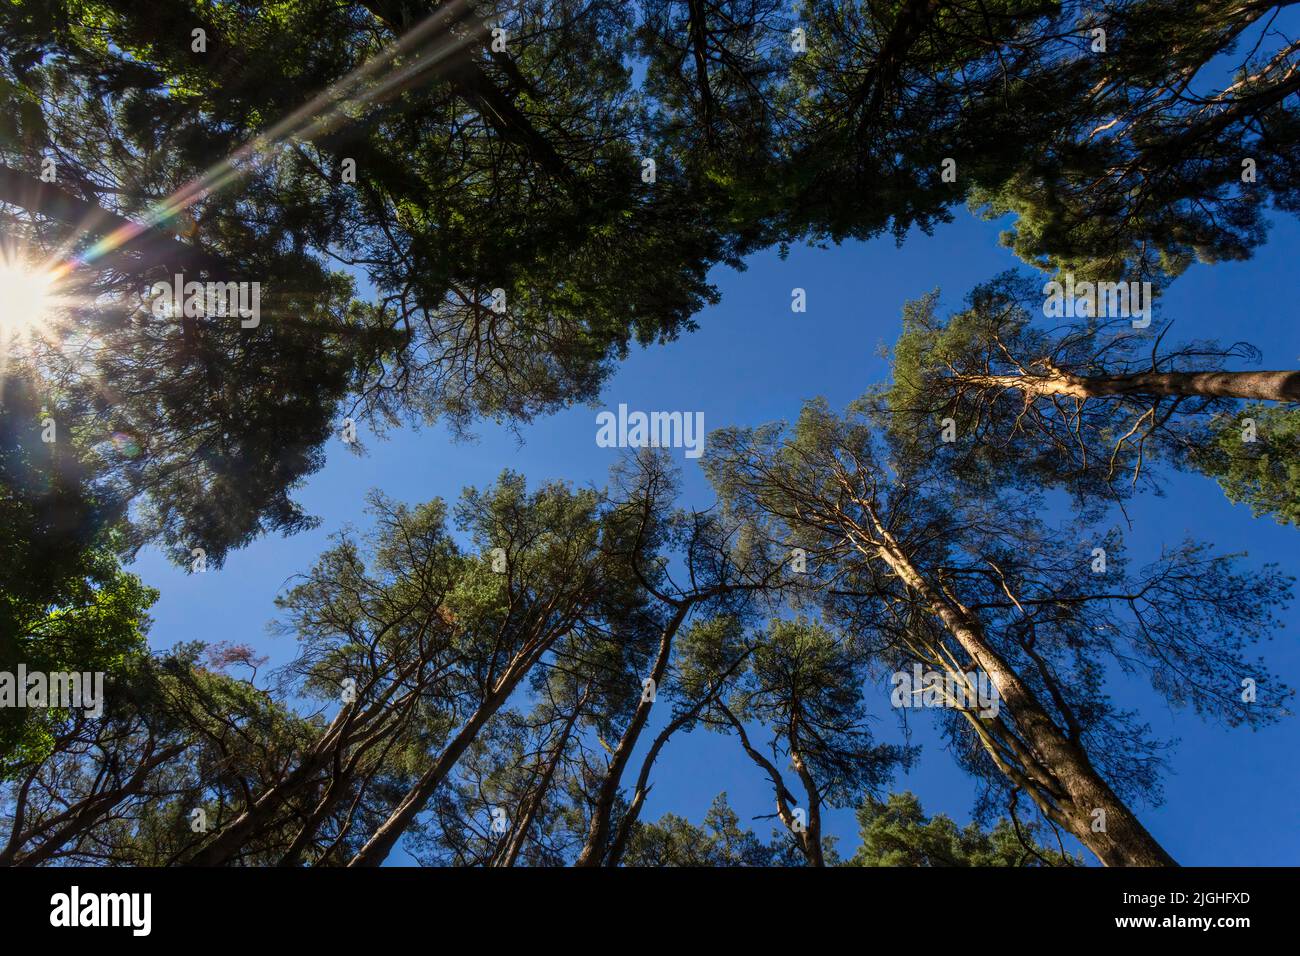 Looking up through a tree lined forest as the sun bursts through the branches. Stock Photo